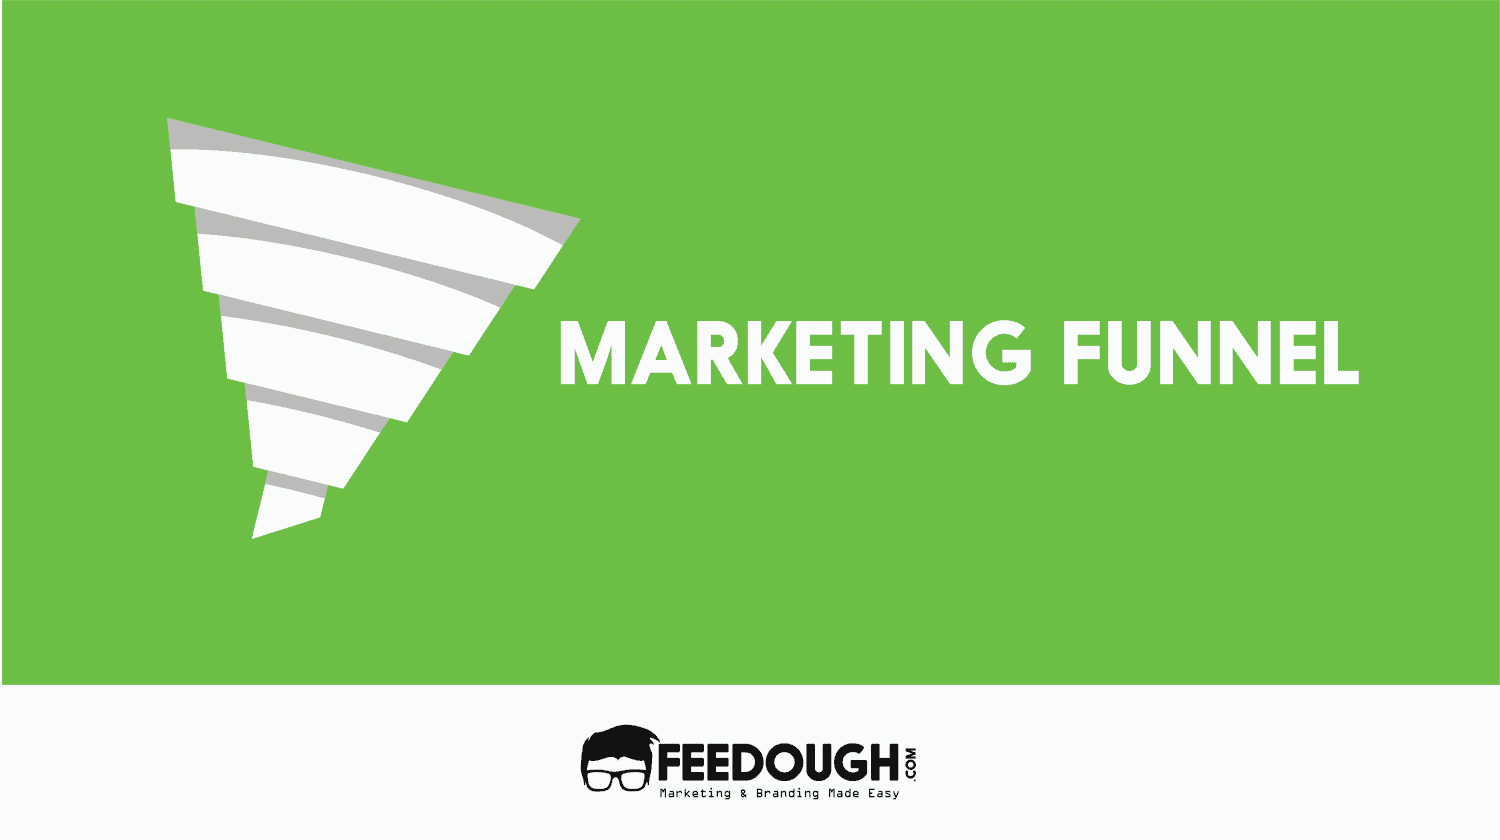 What Is Marketing Funnel & How Does It Work?